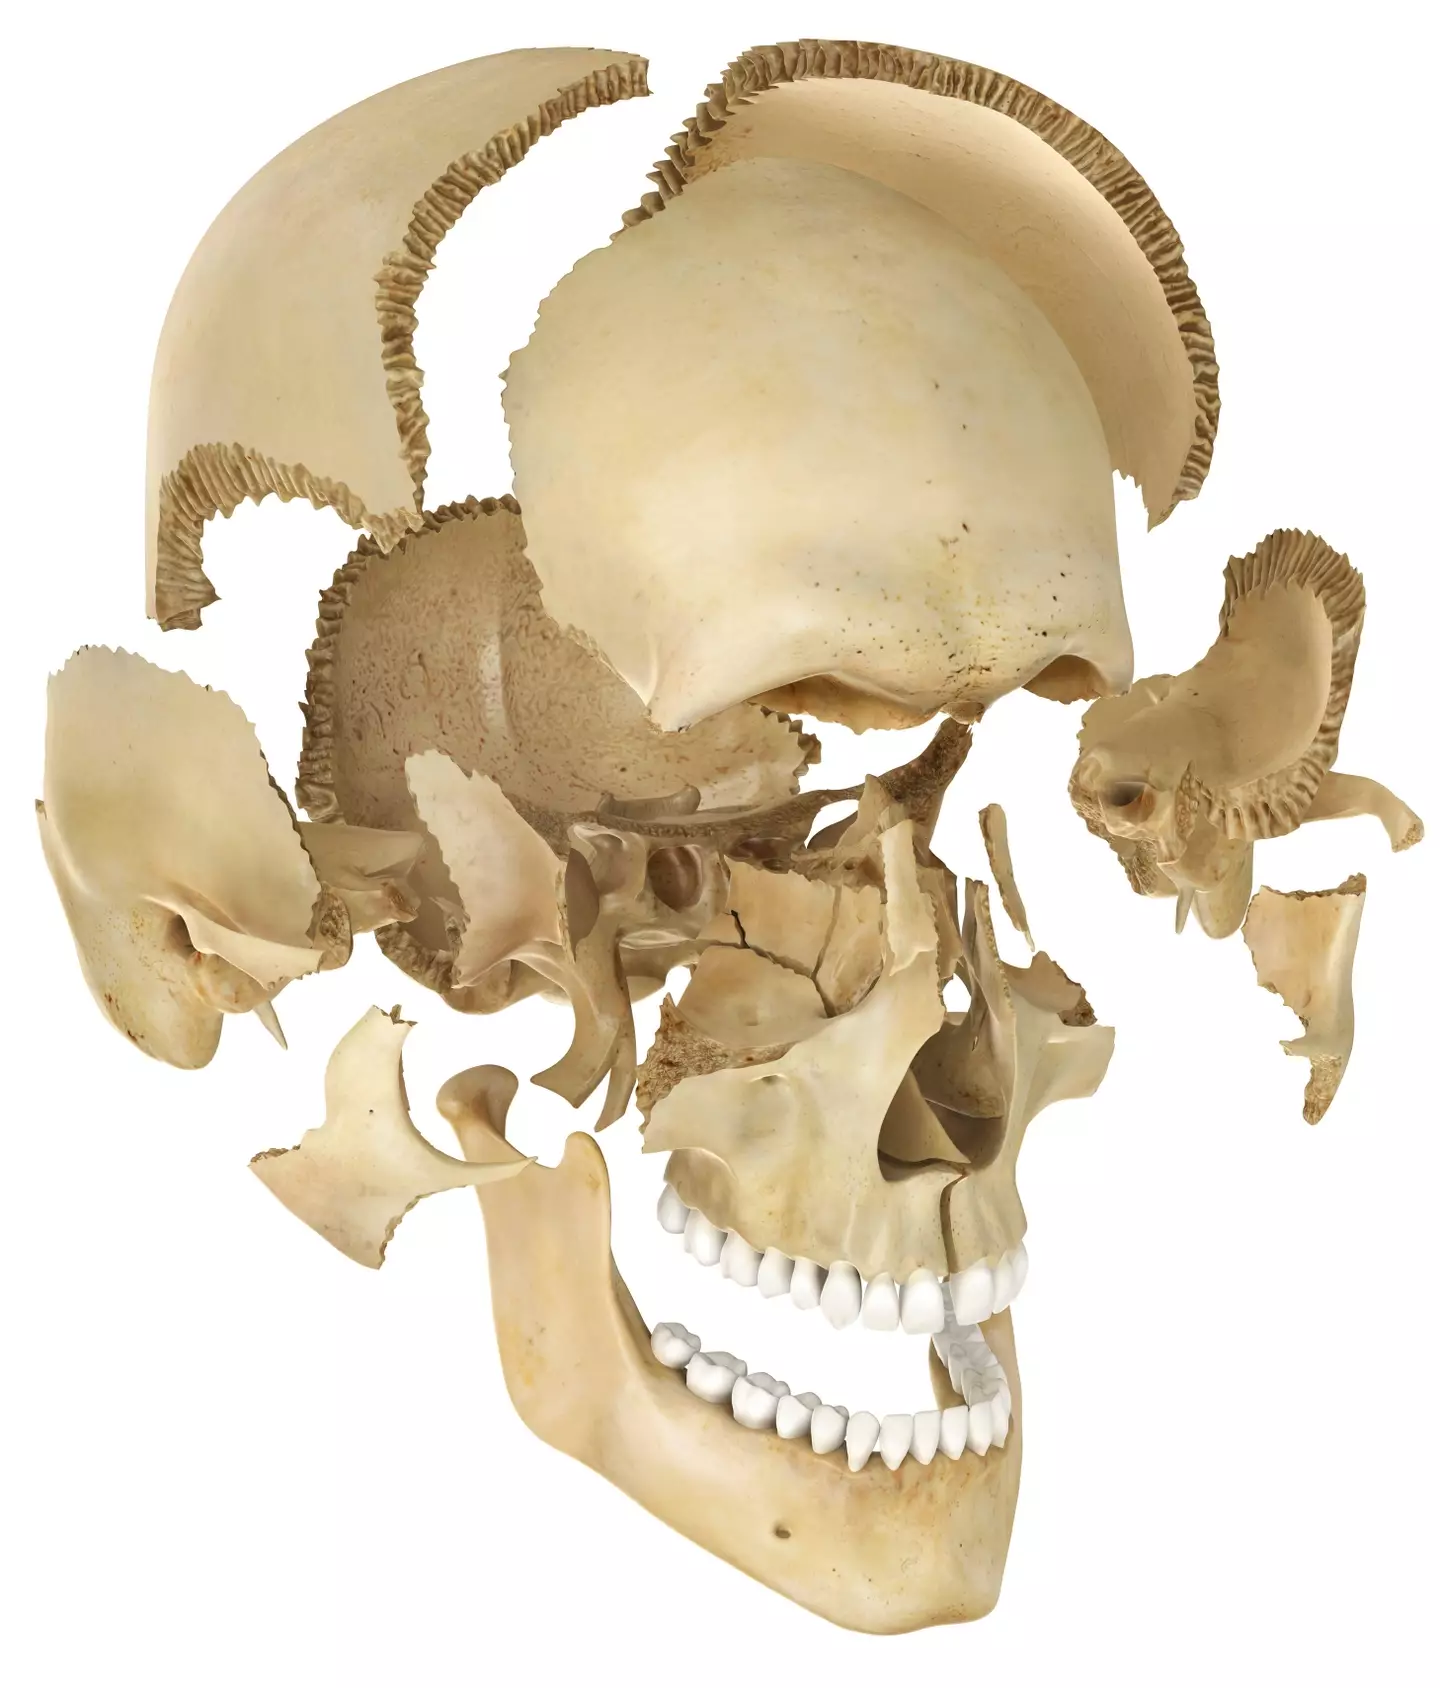 The skull is actually made up of several different bones and joined together with sutures.